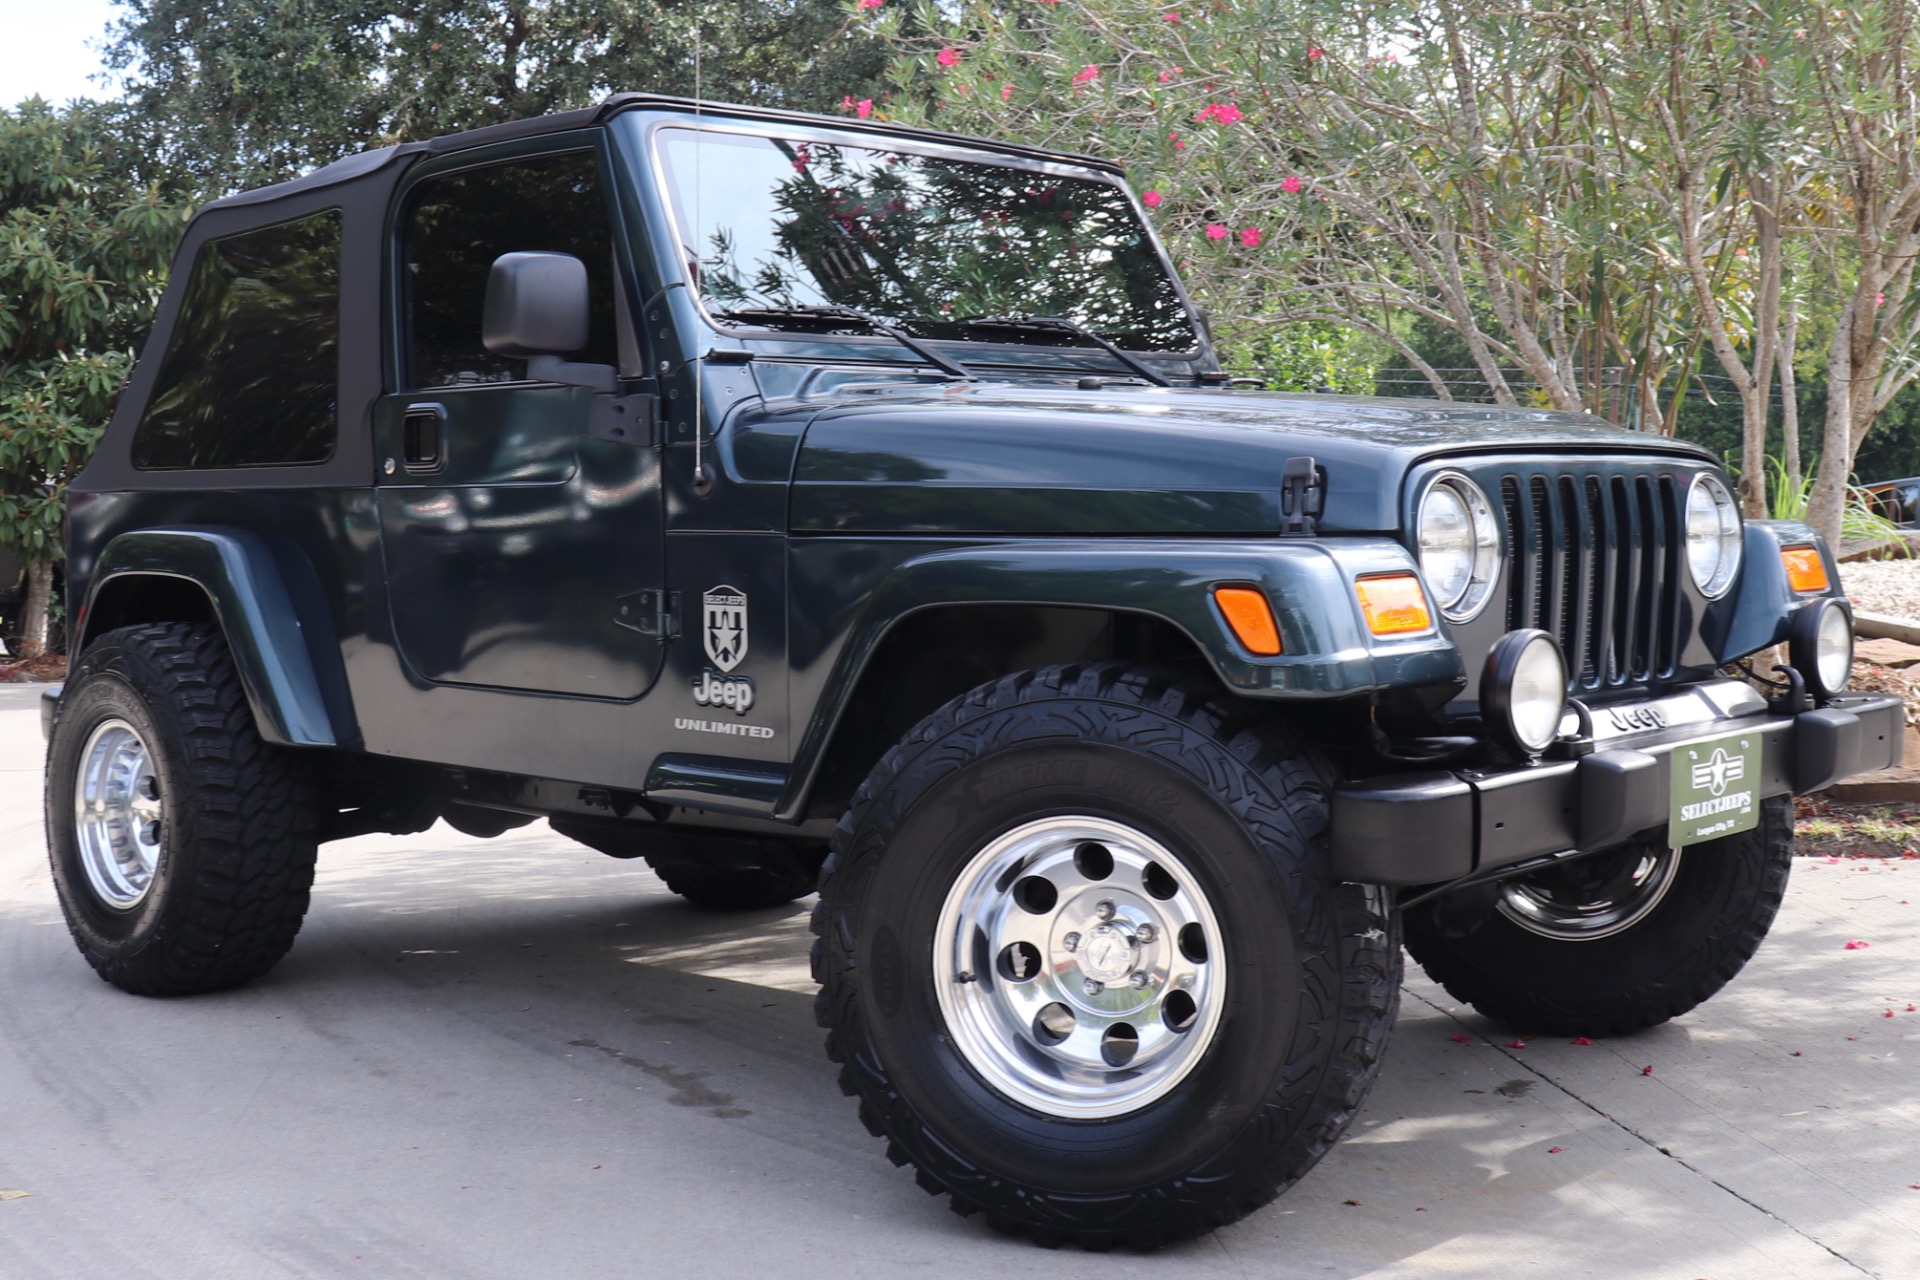 Used 2005 Jeep Wrangler Unlimited For Sale ($19,995) | Select Jeeps Inc.  Stock #335223